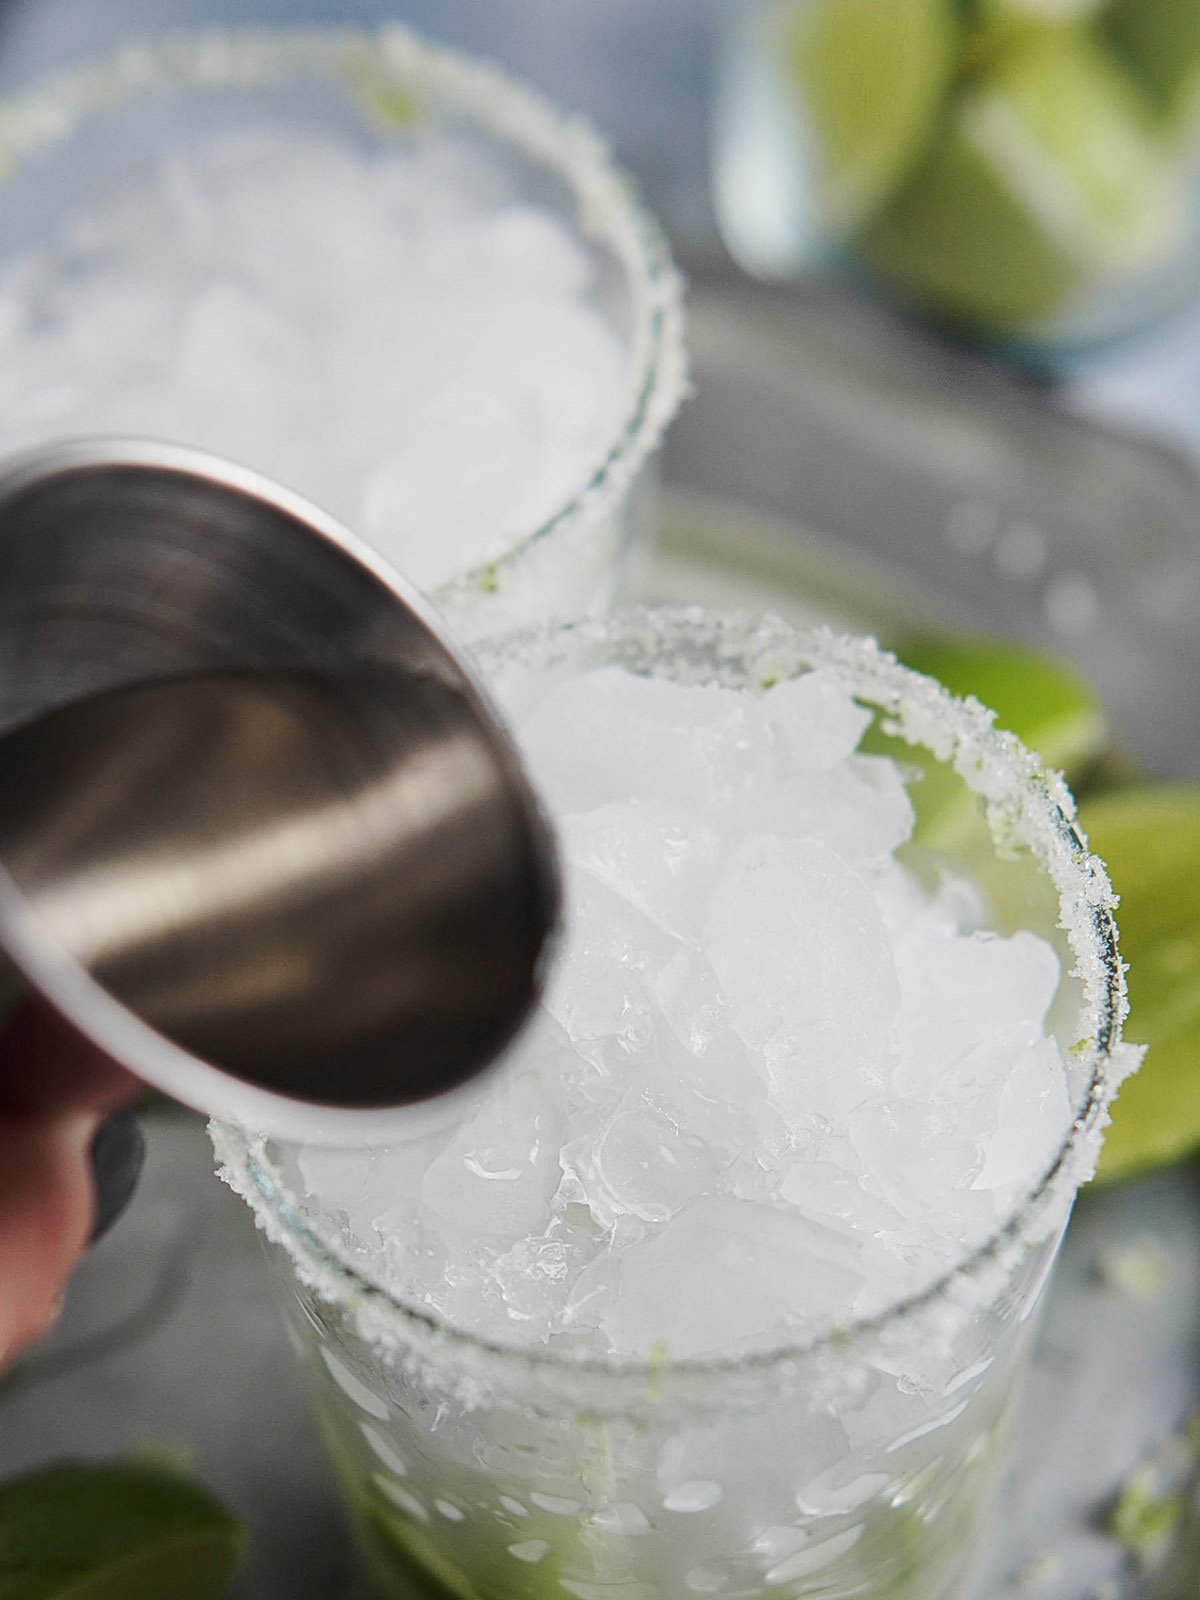 Adding Cachaca cocktail into a glass in ice.